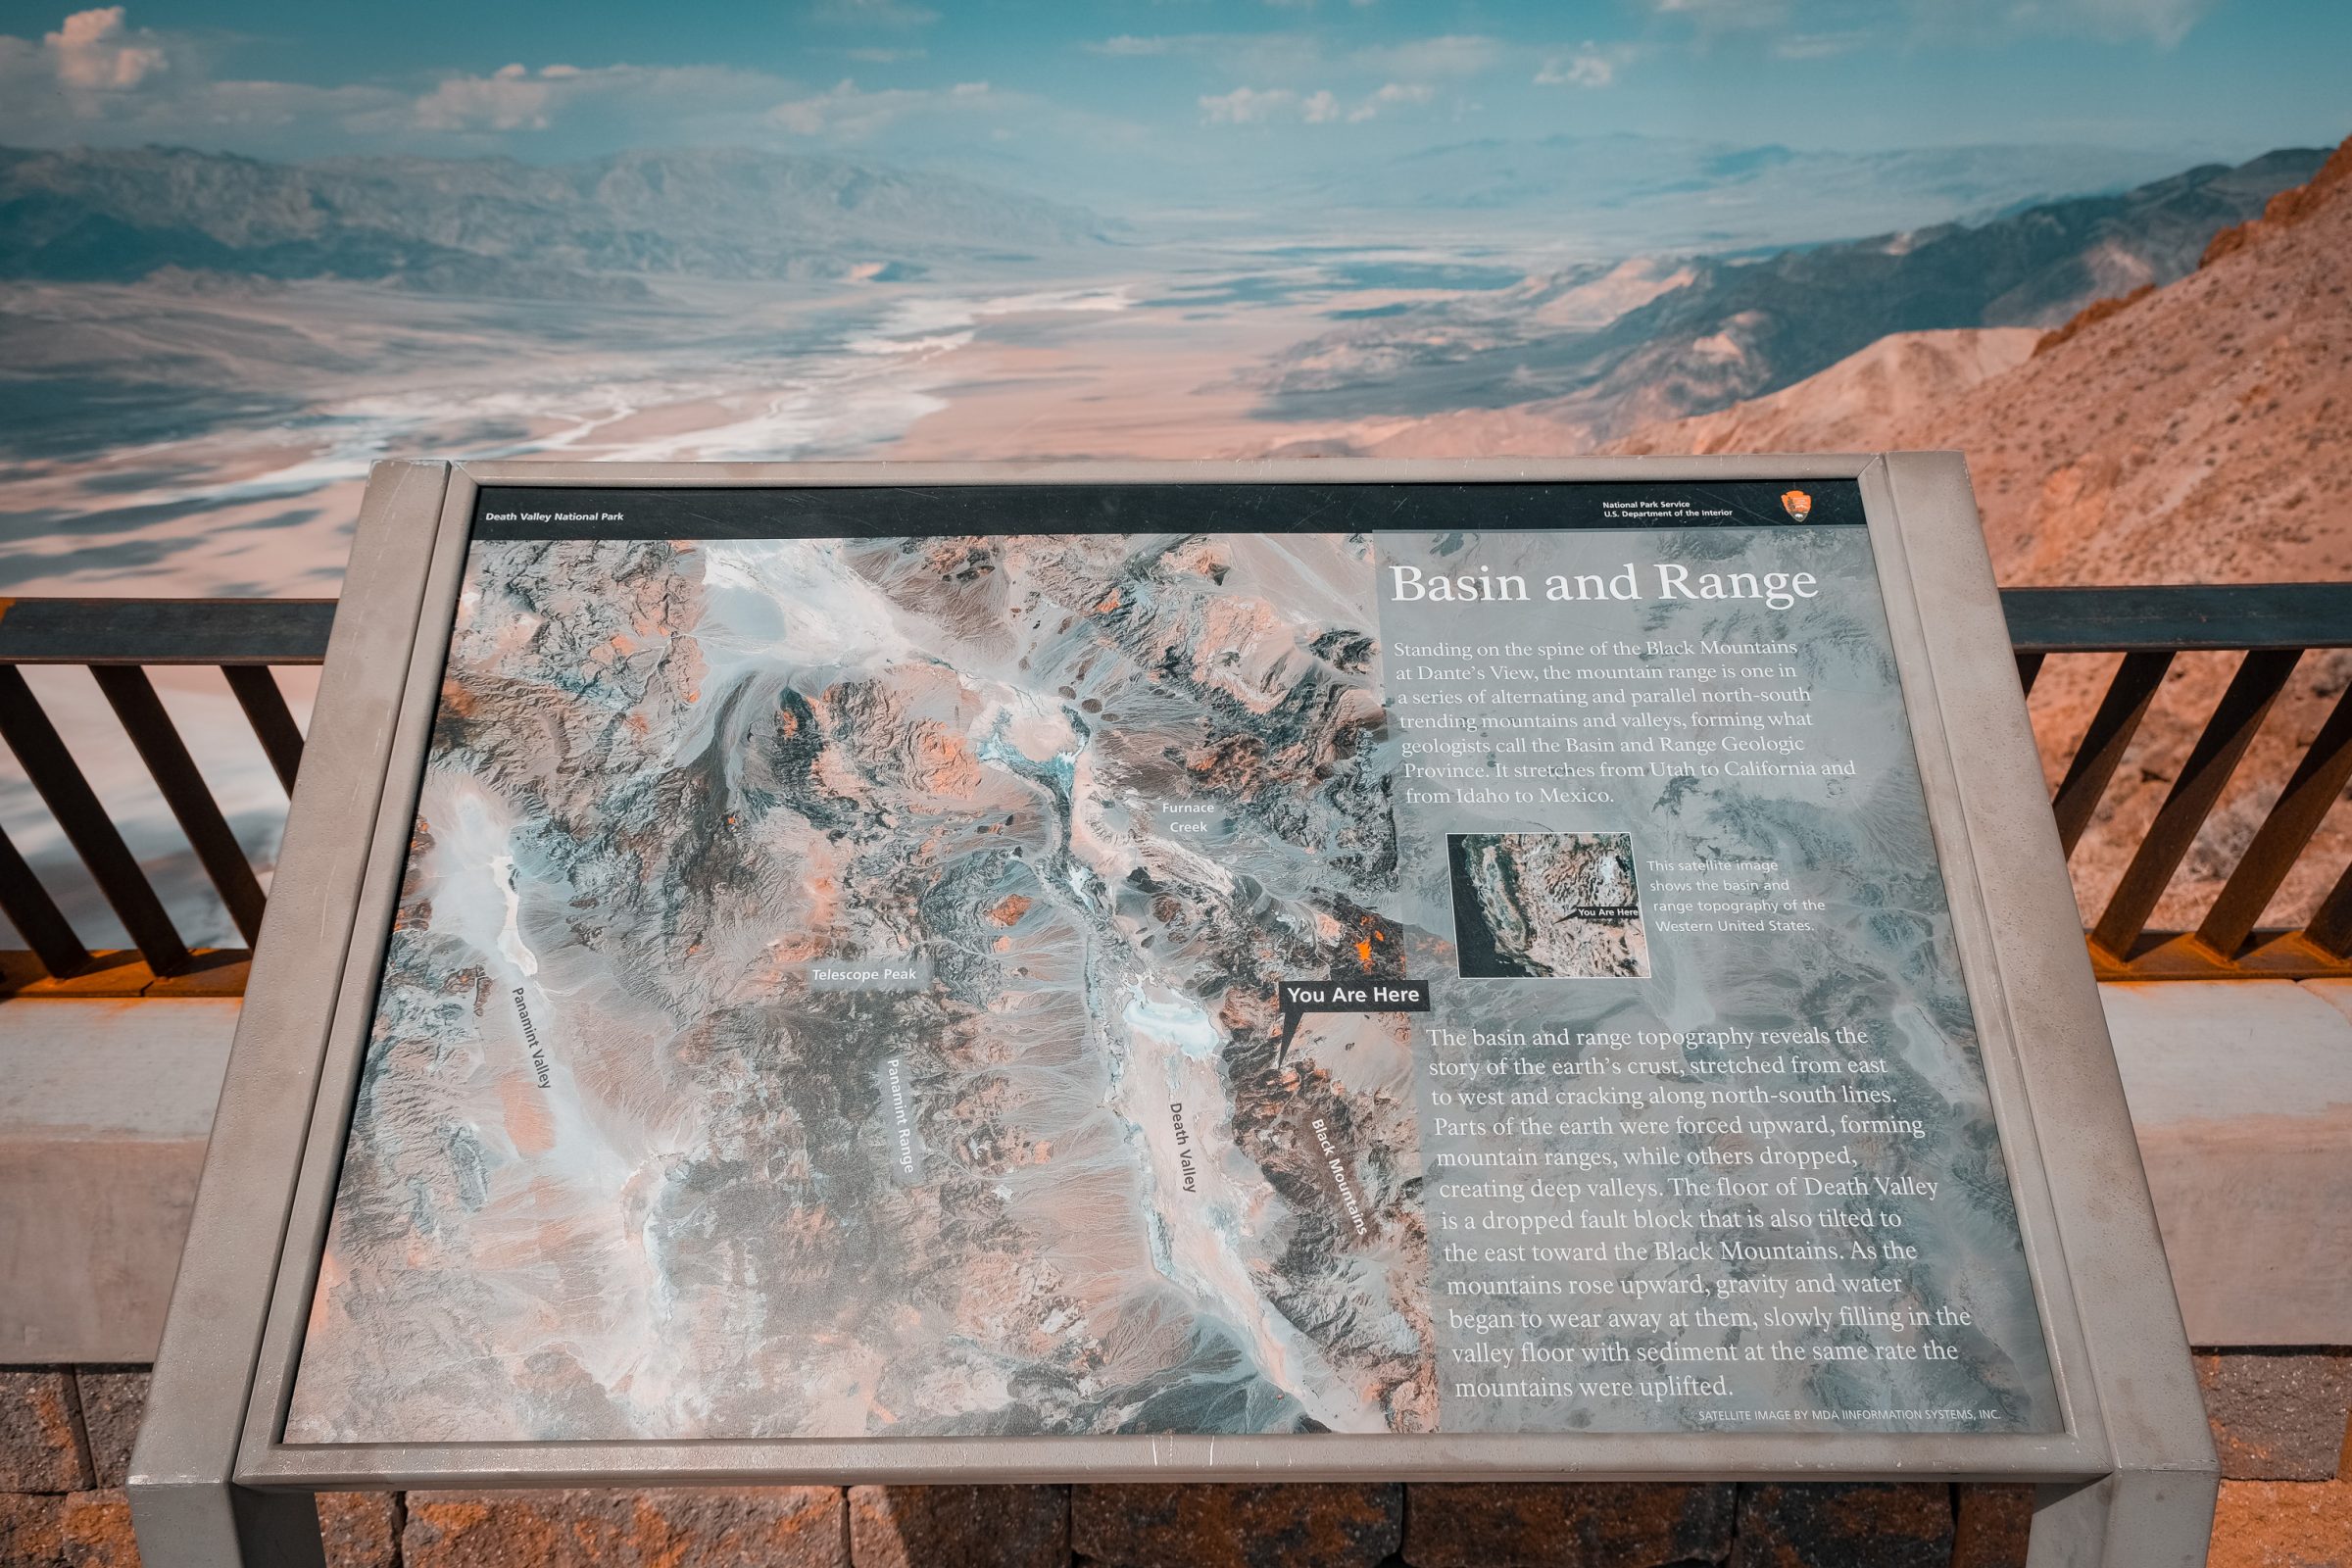 Dante's View Information Board in Death Valley. Click to enlarge.